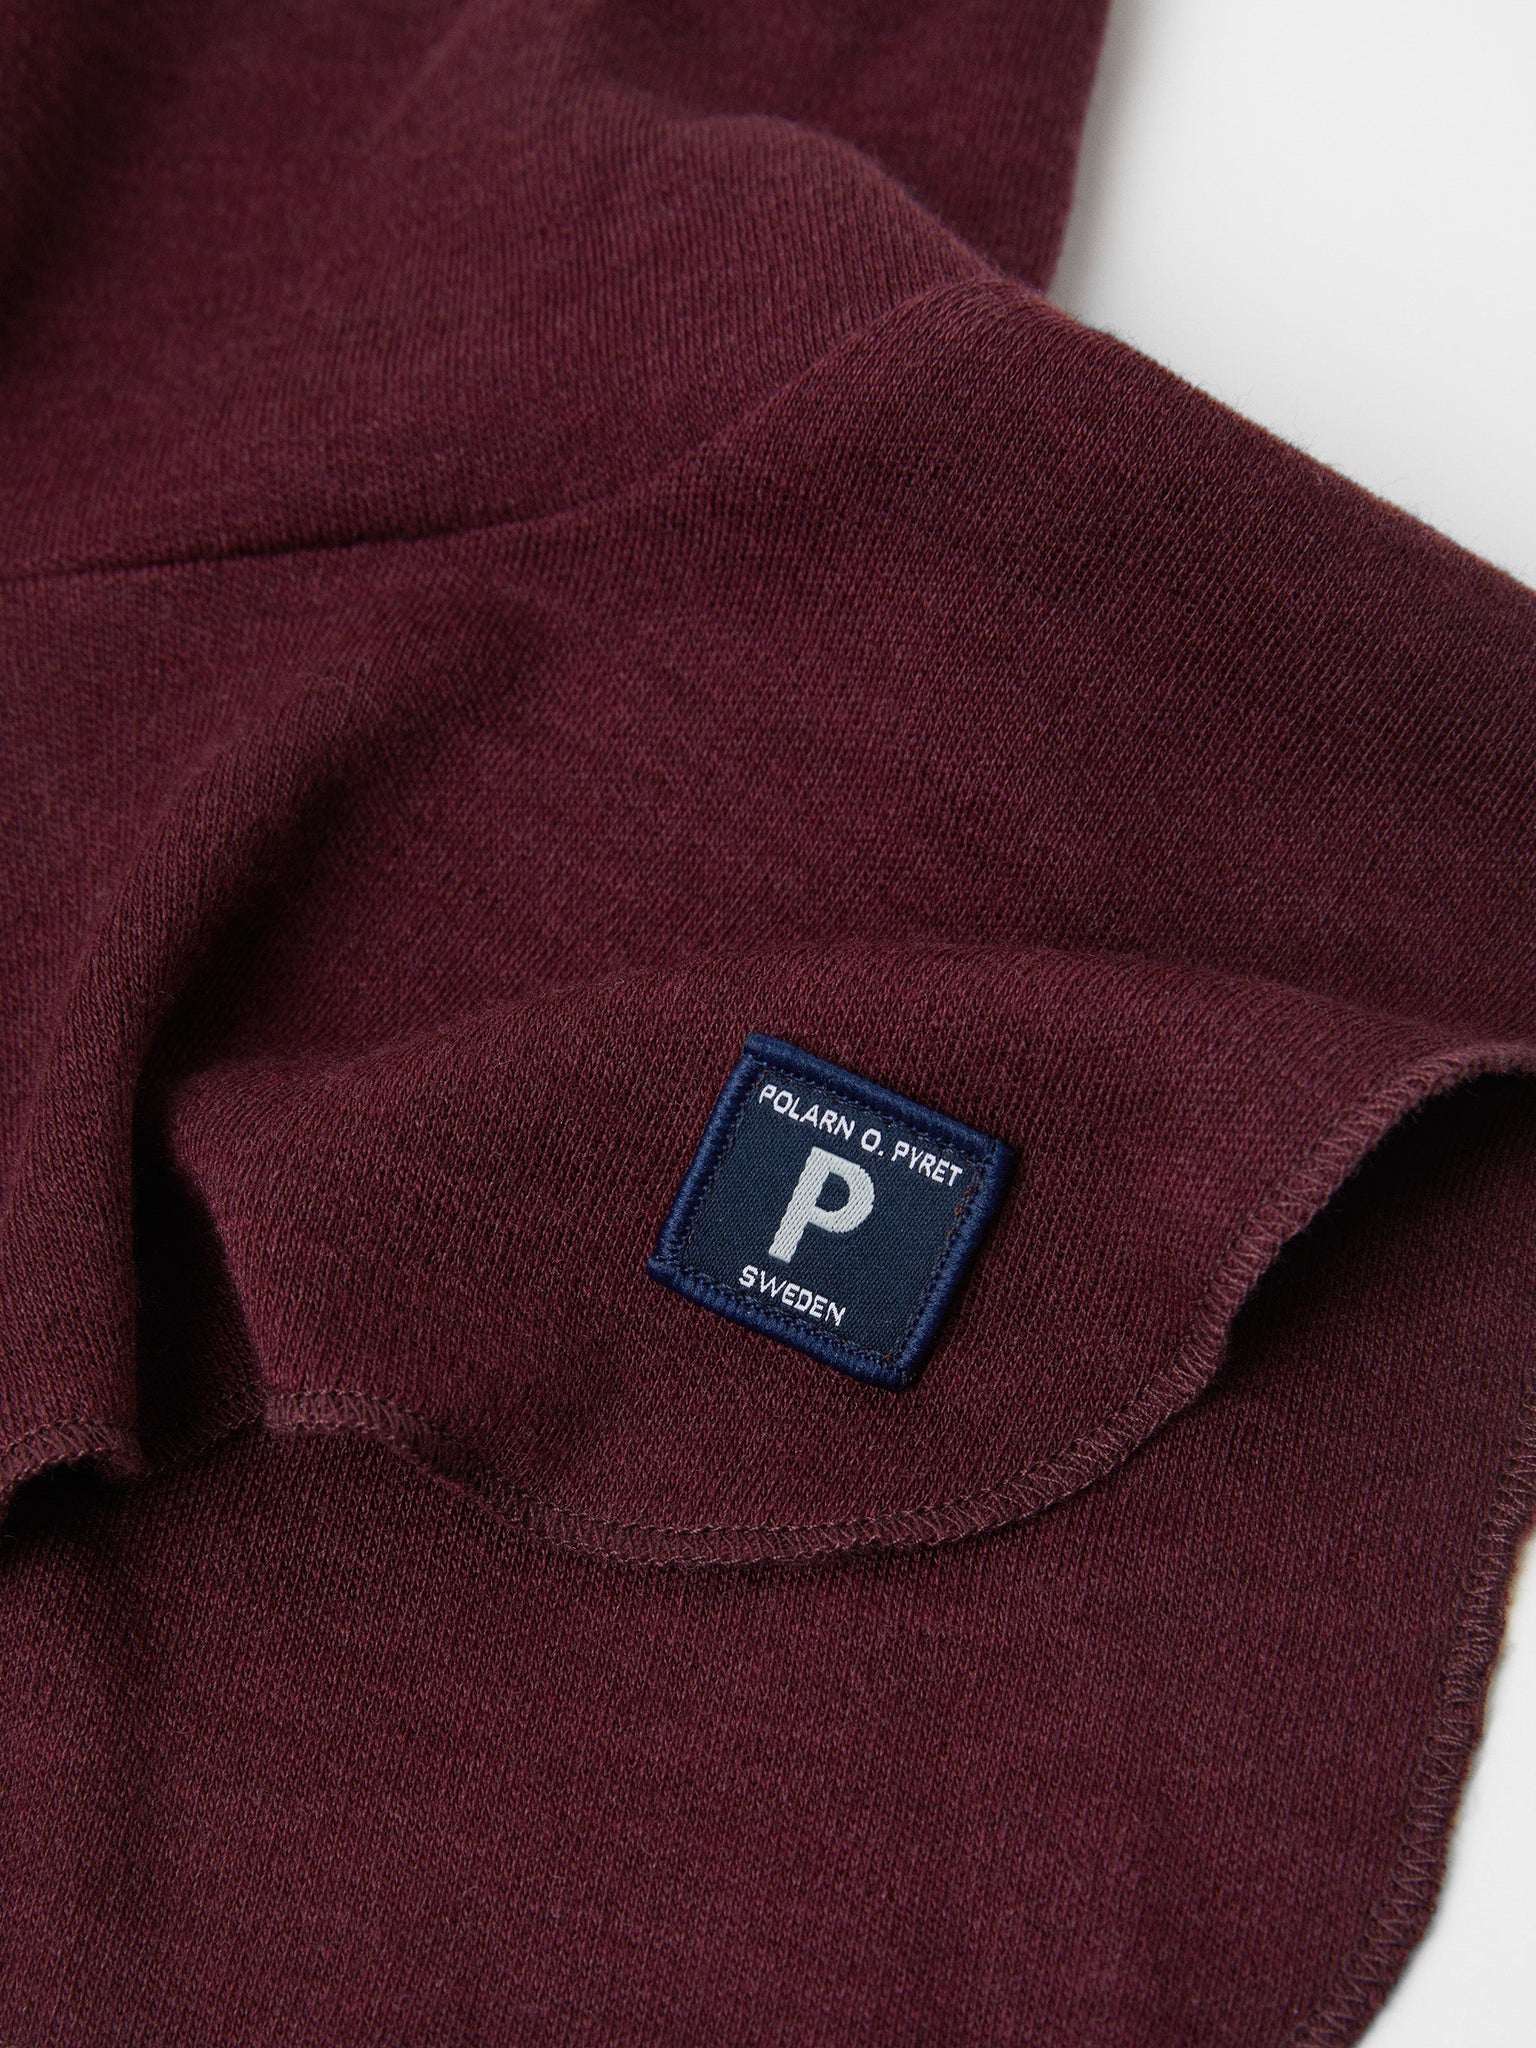 Merino Wool Burgundy Kids Neck Warmer from the Polarn O. Pyret outerwear collection. Quality kids clothing made to last.